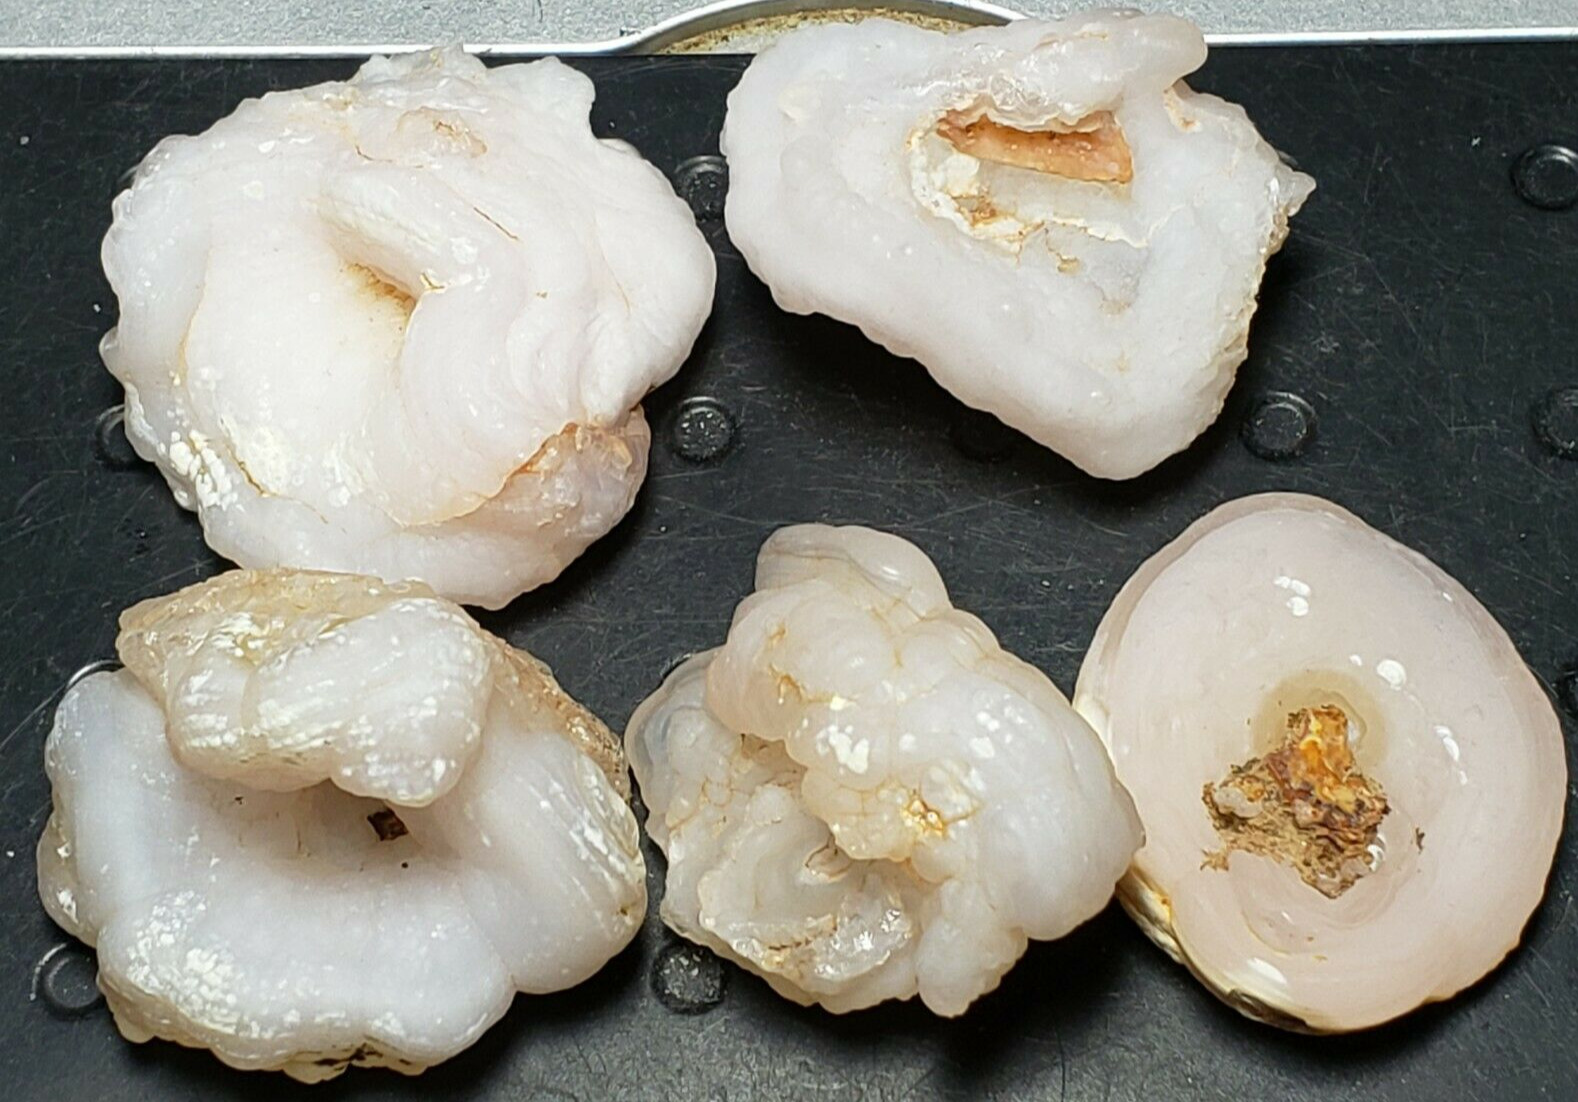 CHALCEDONY ROSE Natural Mineral Specimens x5 From Ludlow California (4.3 oz.)